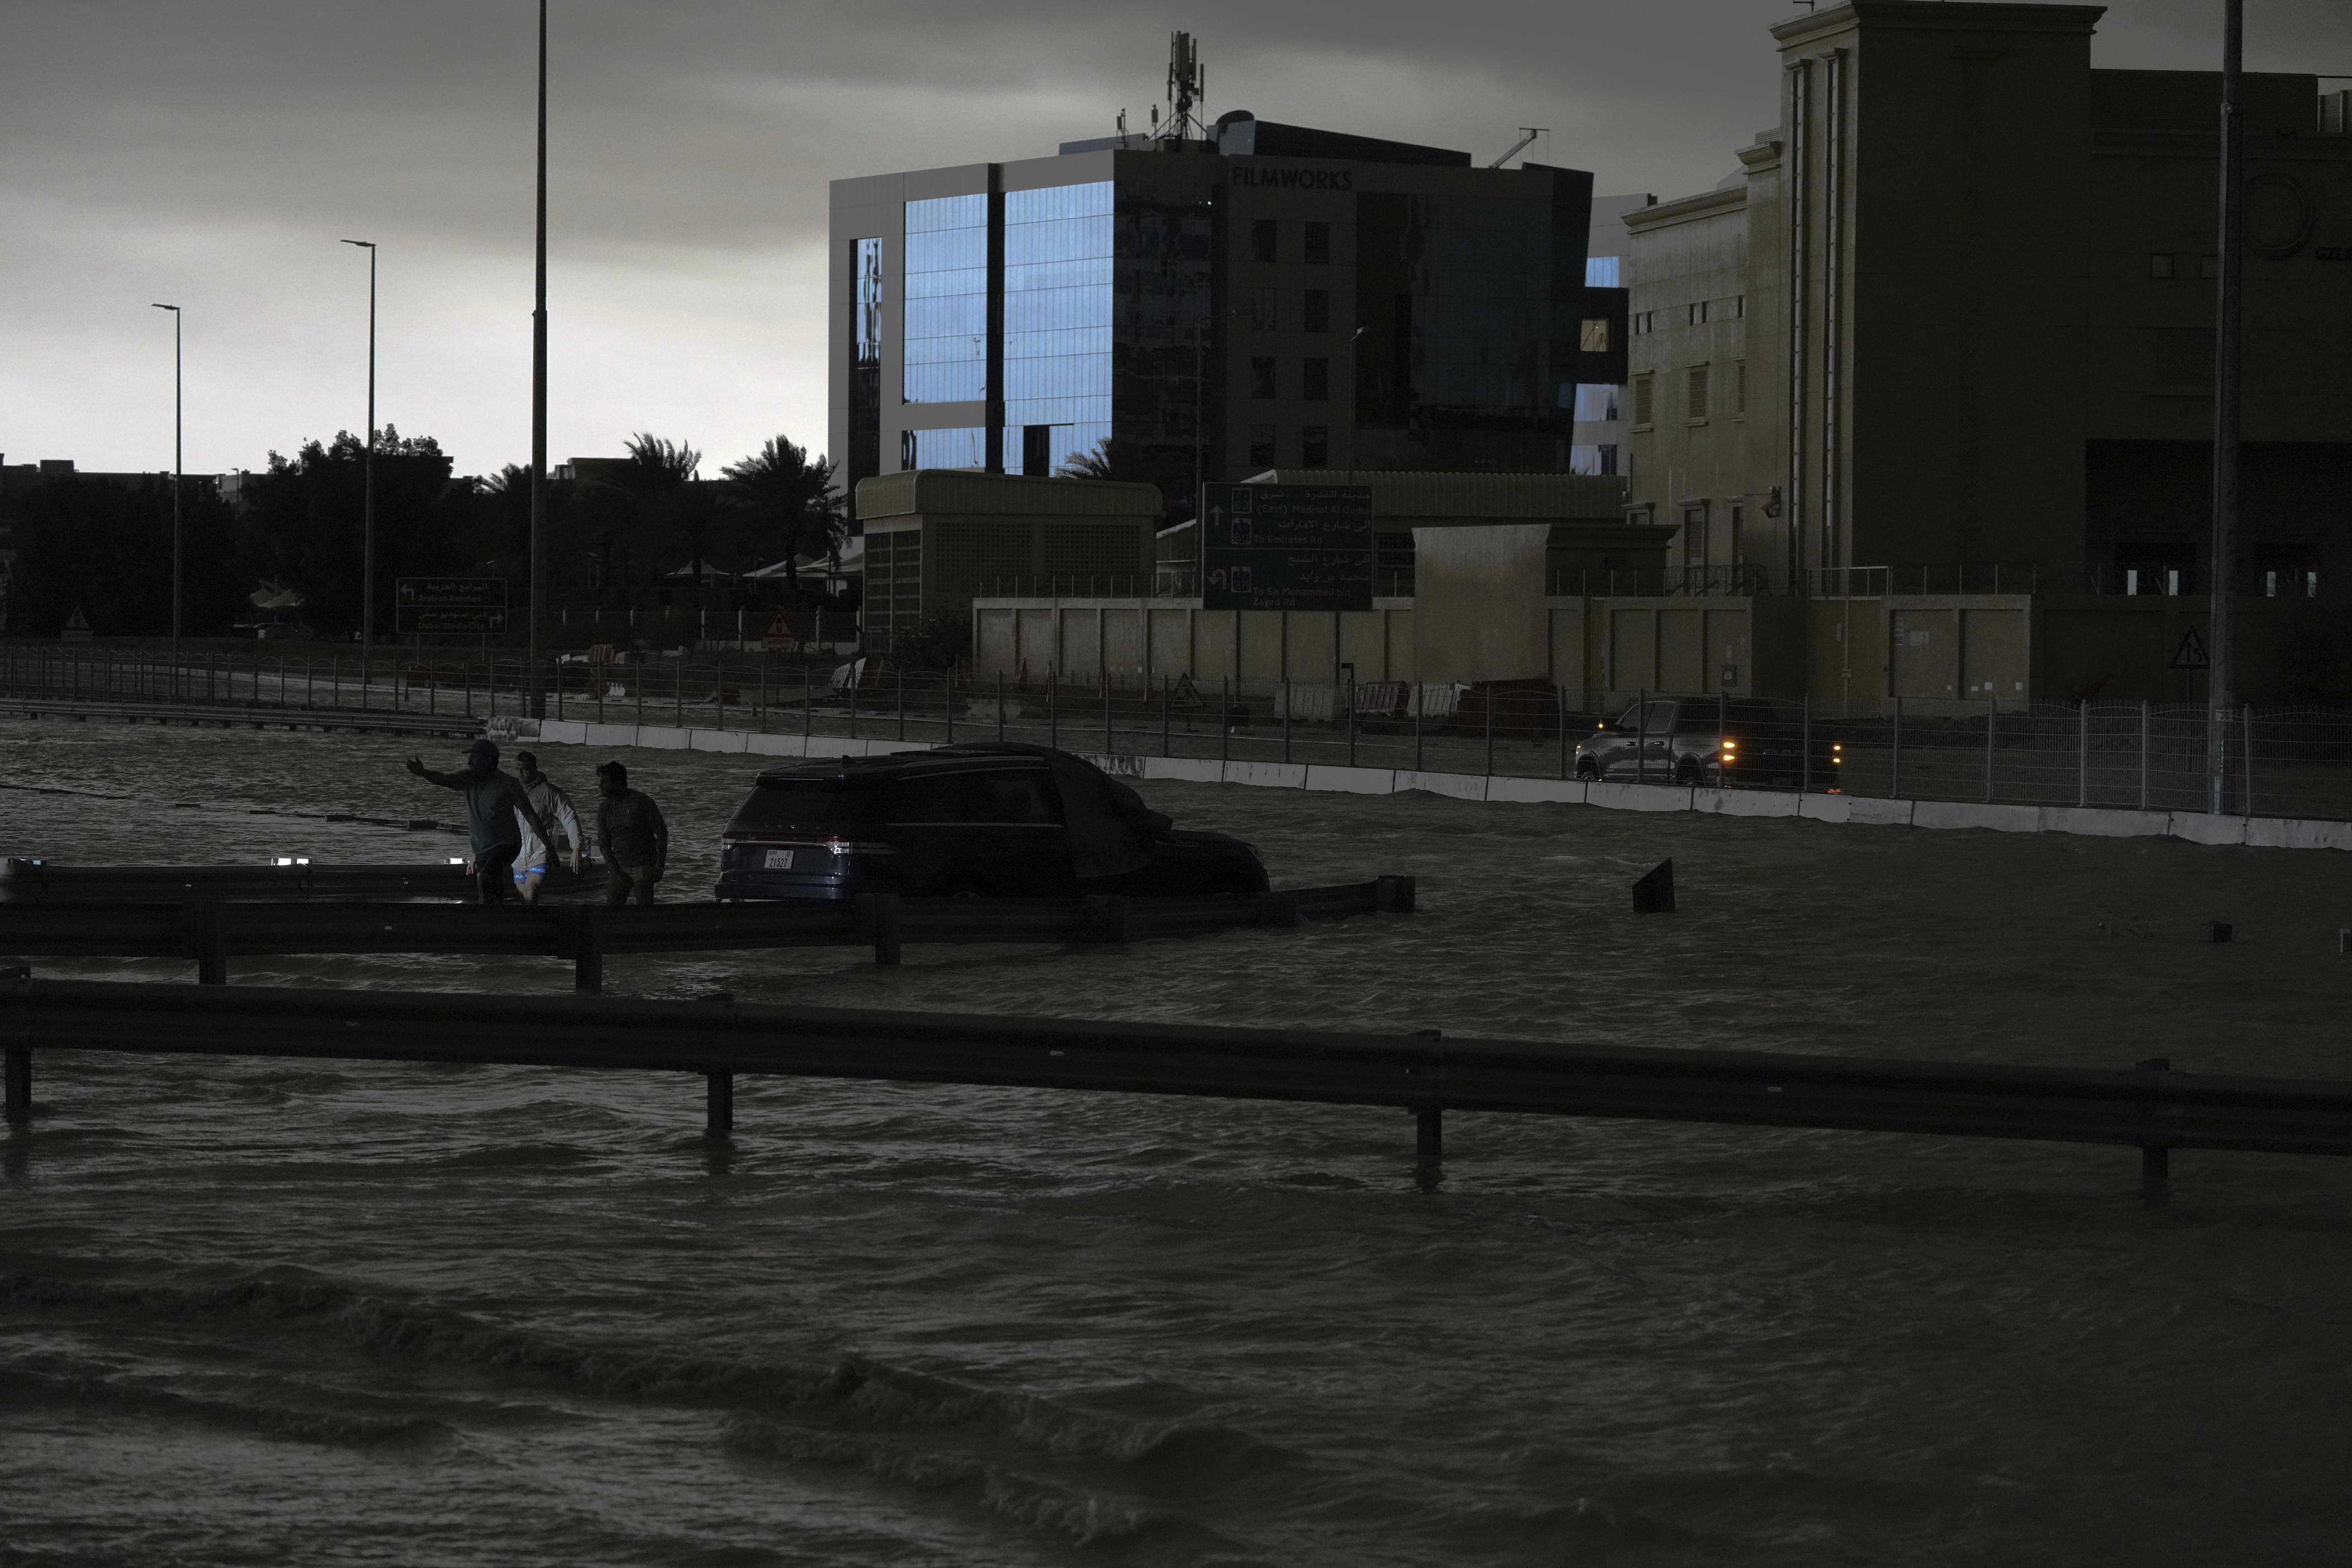 storm dumps heaviest rain ever recorded in desert nation of uae, flooding roads and dubai's airport